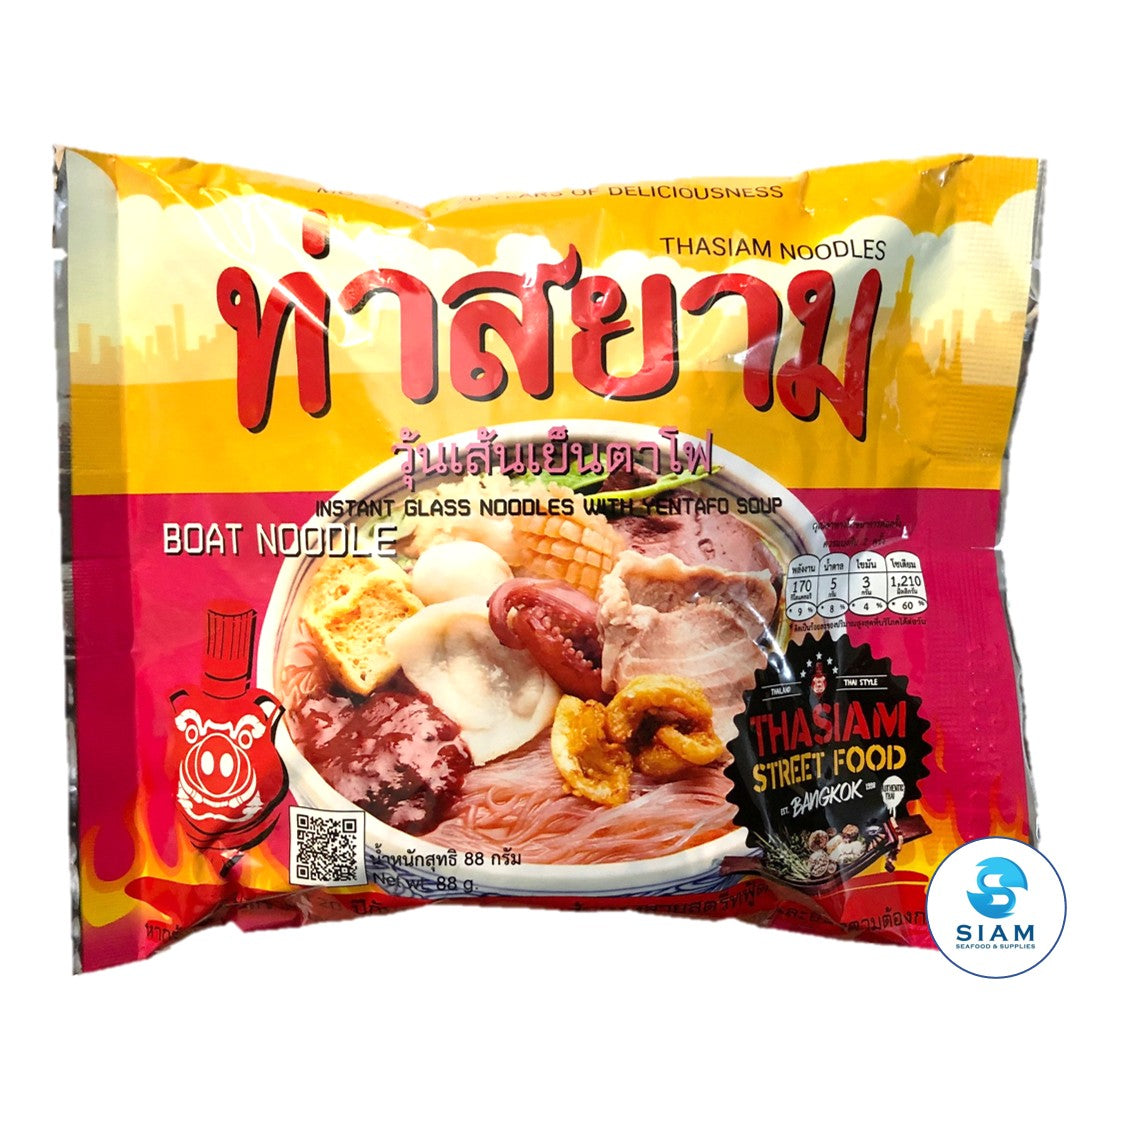 Instant Yentafo Noodle, Bean Thread with Yentafo Soup - ThaSiam (Available in 1-pack and 3-pack) ก๋วยเตี๋ยวเรือท่าสยาม วุ้นเส้นเย็นตาโฟ shippable ThaSiam